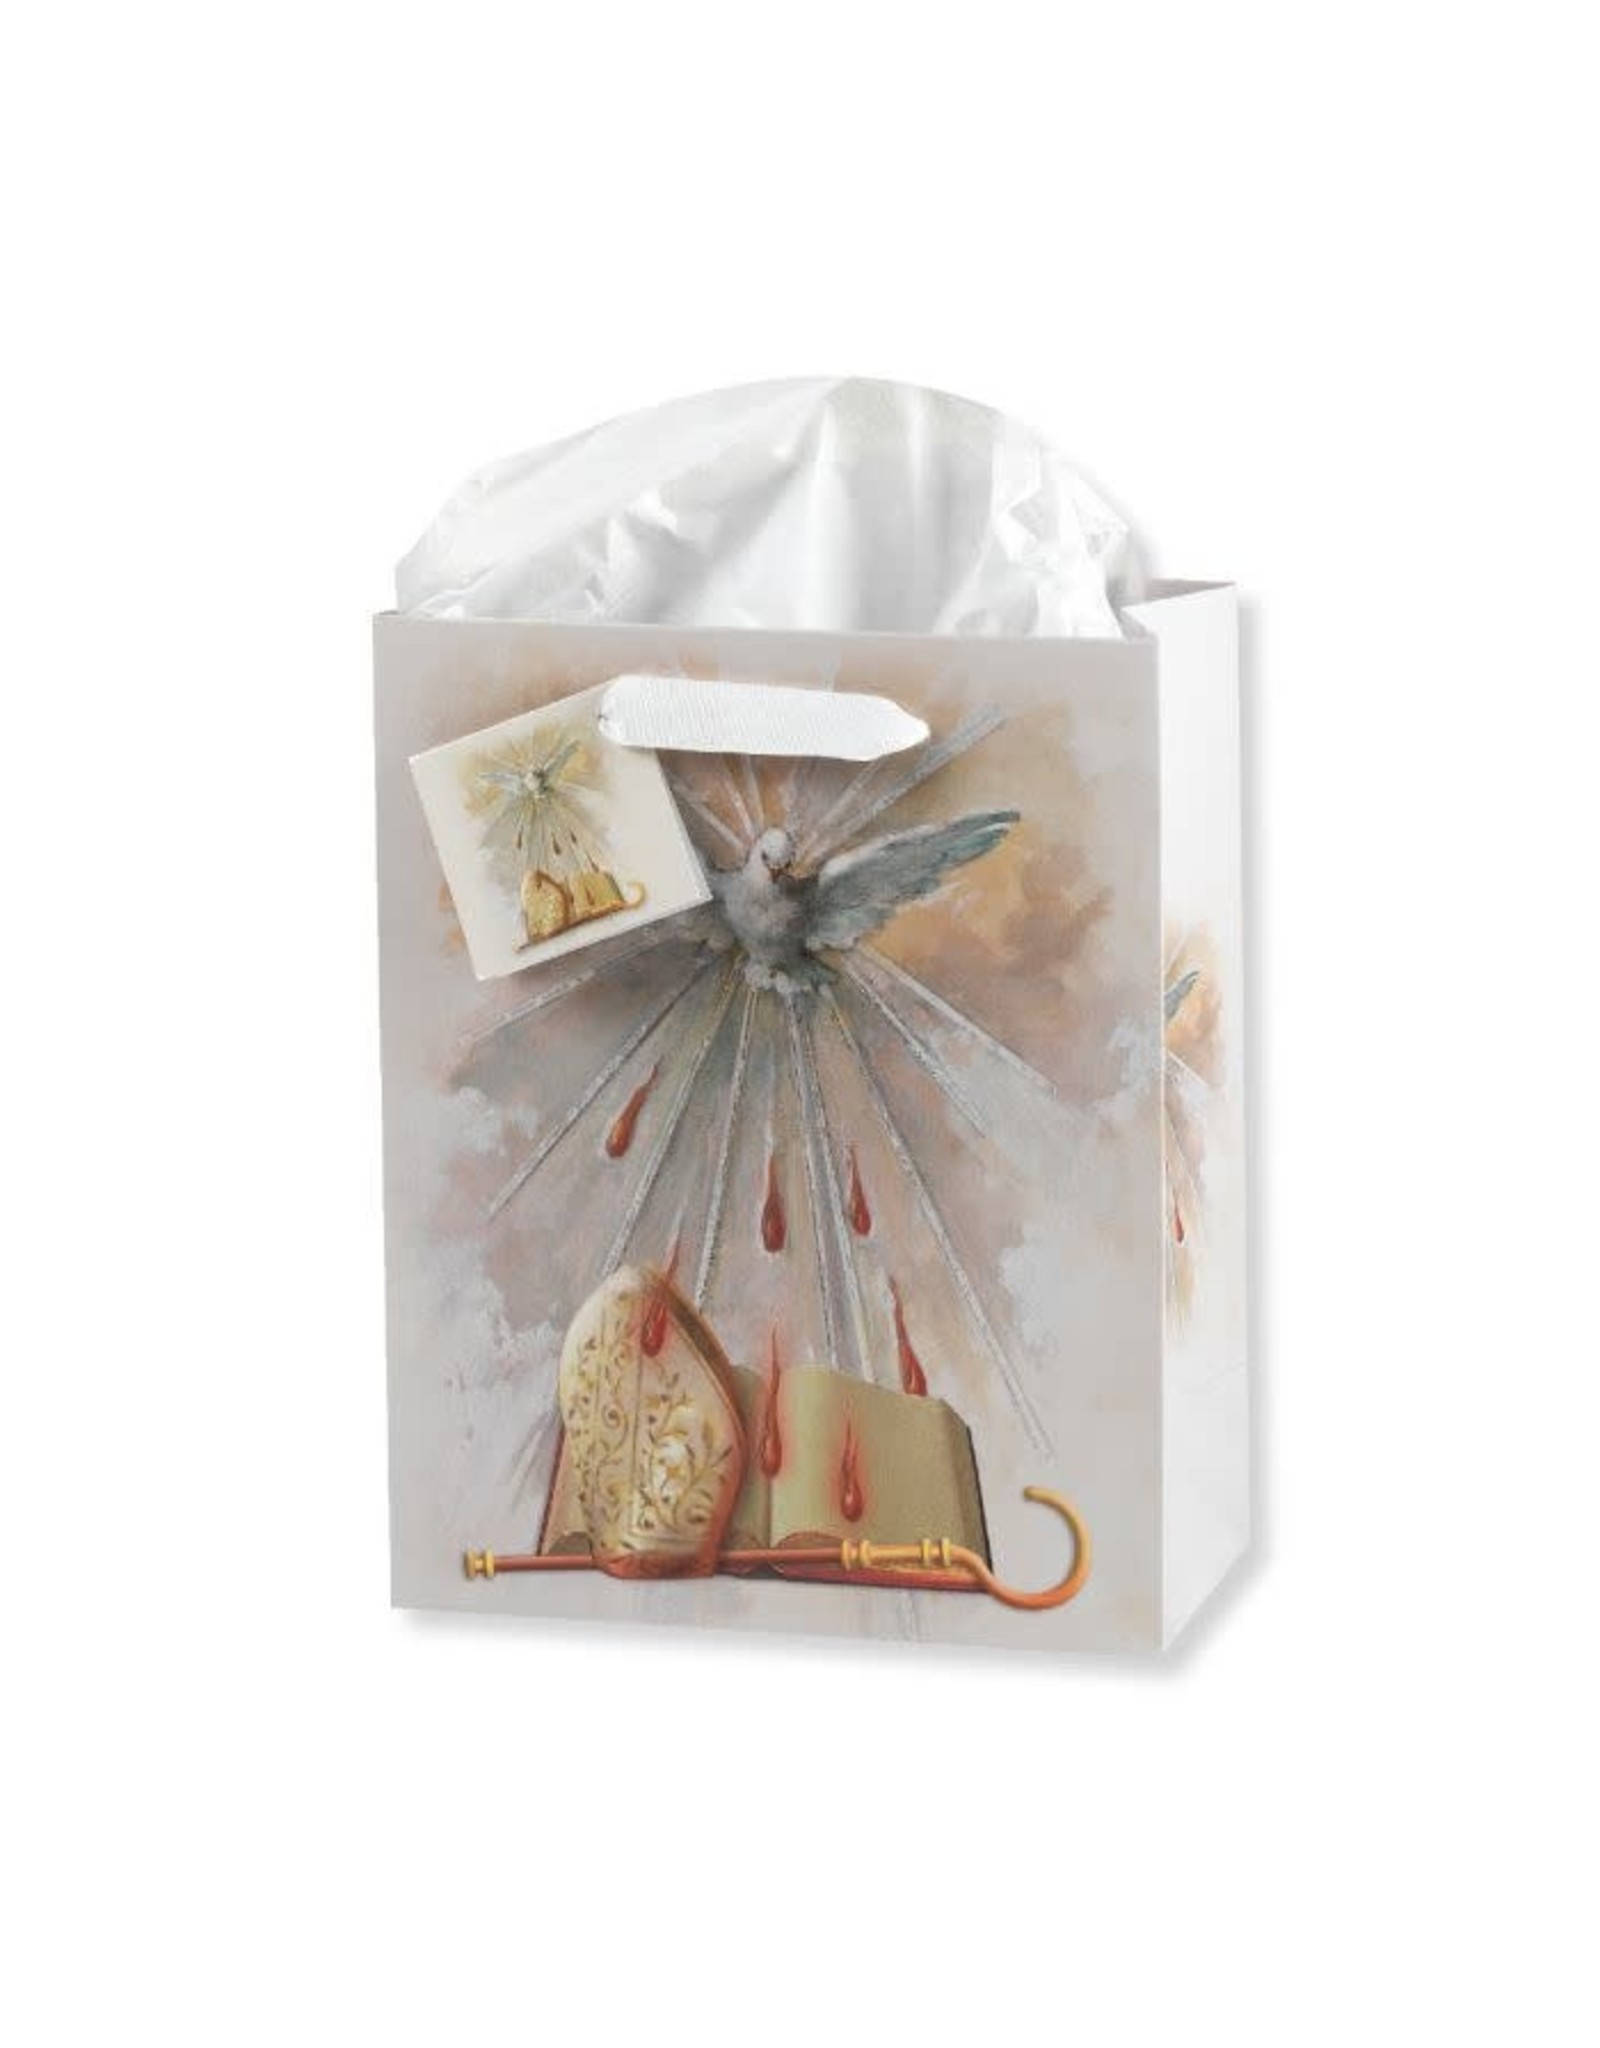 Confirmation - Gift Bag, White Dove, Small (includes Tissue Paper)